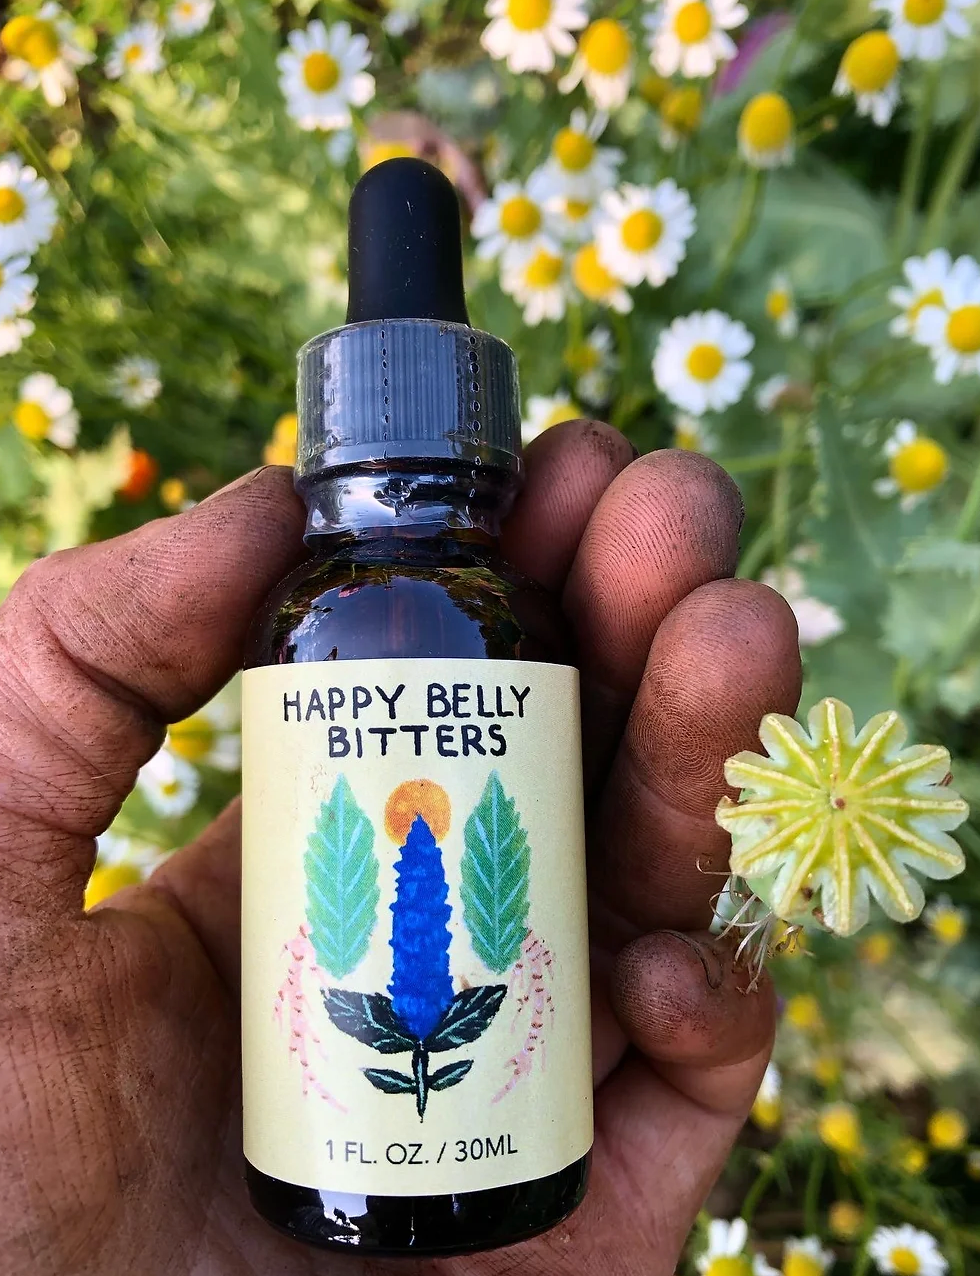 Night Heron Farms: Happy Belly Bitters